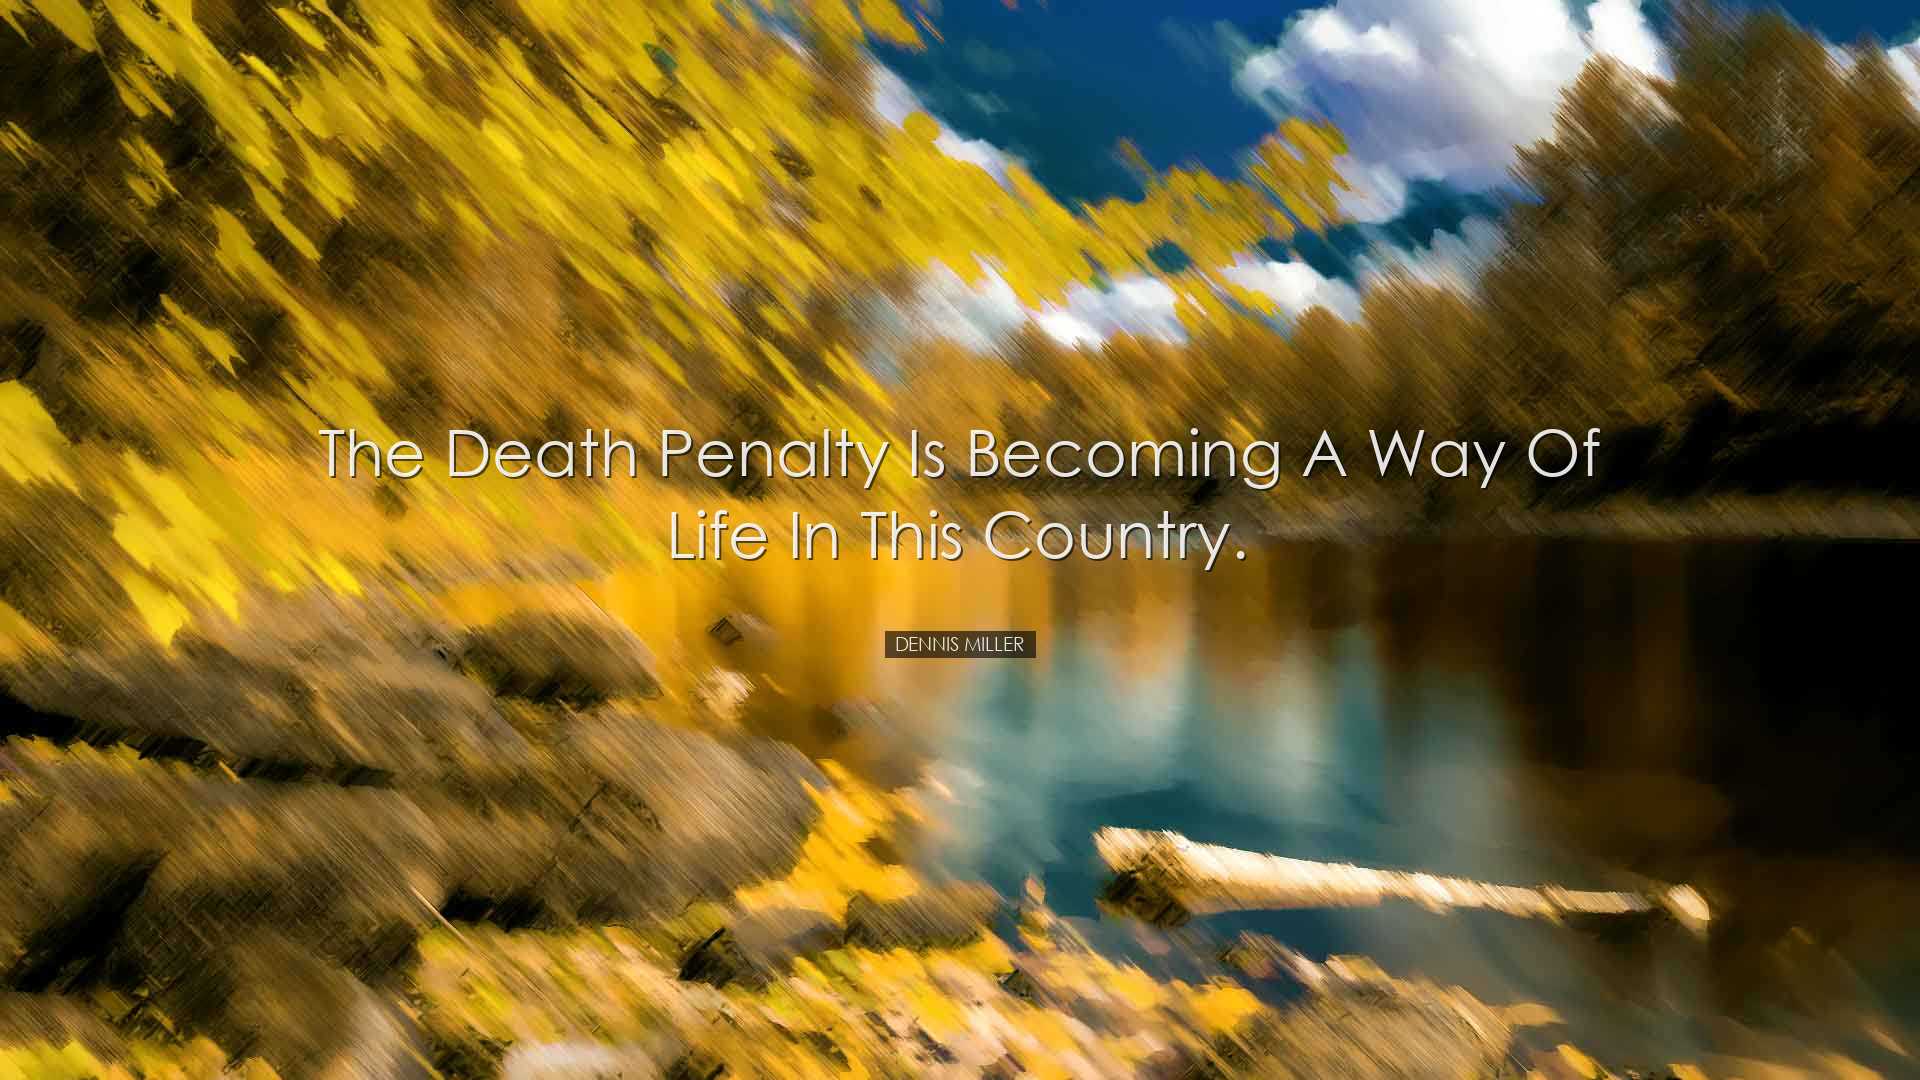 The death penalty is becoming a way of life in this country. - Den